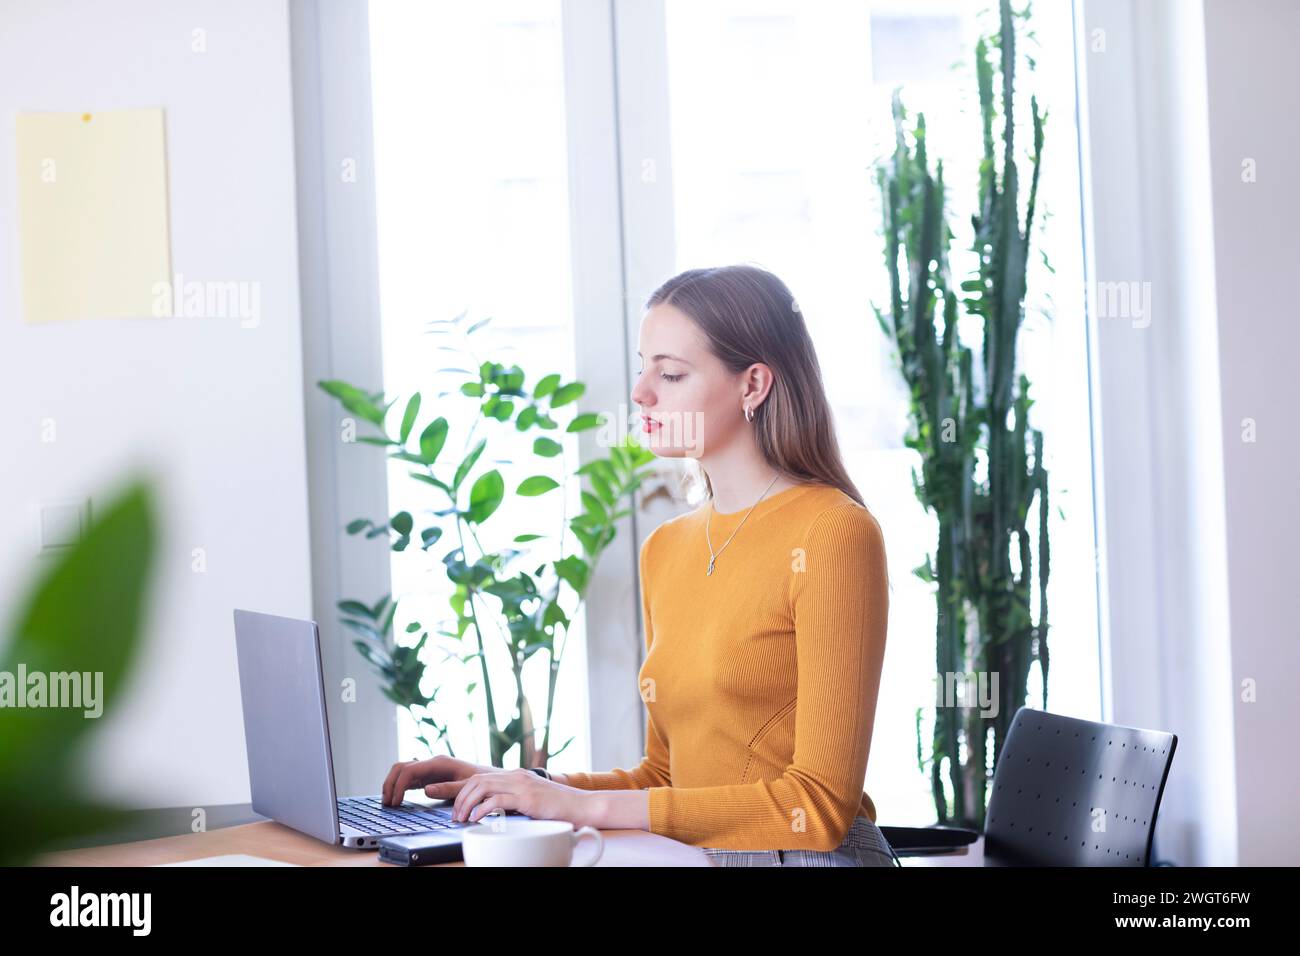 young woman in a room with green plants, home office Stock Photo